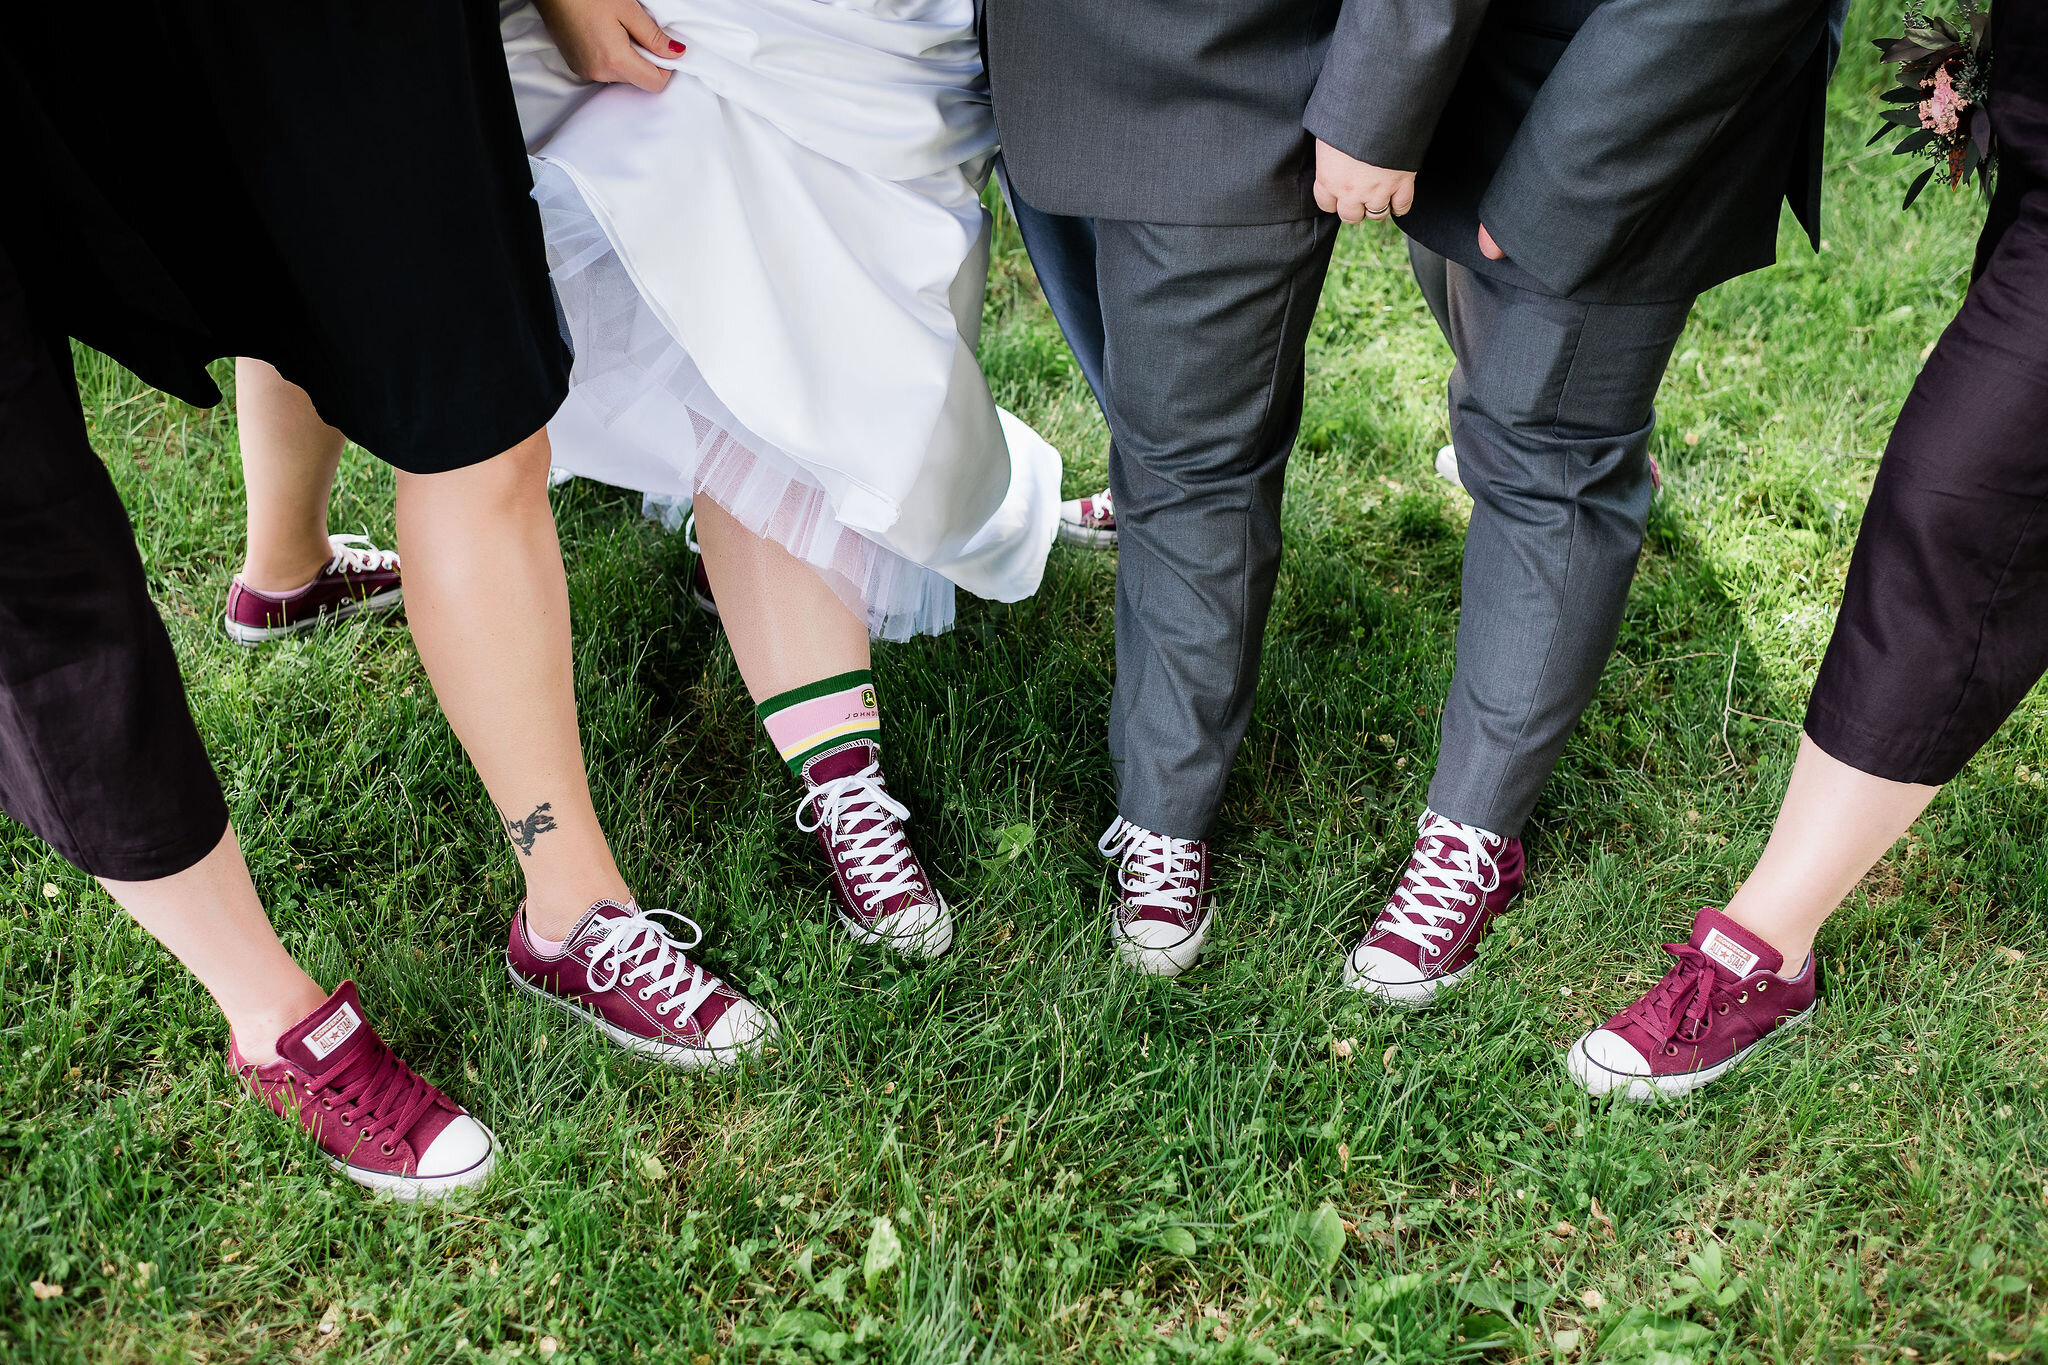 Wedding party showing their Converse sneakers